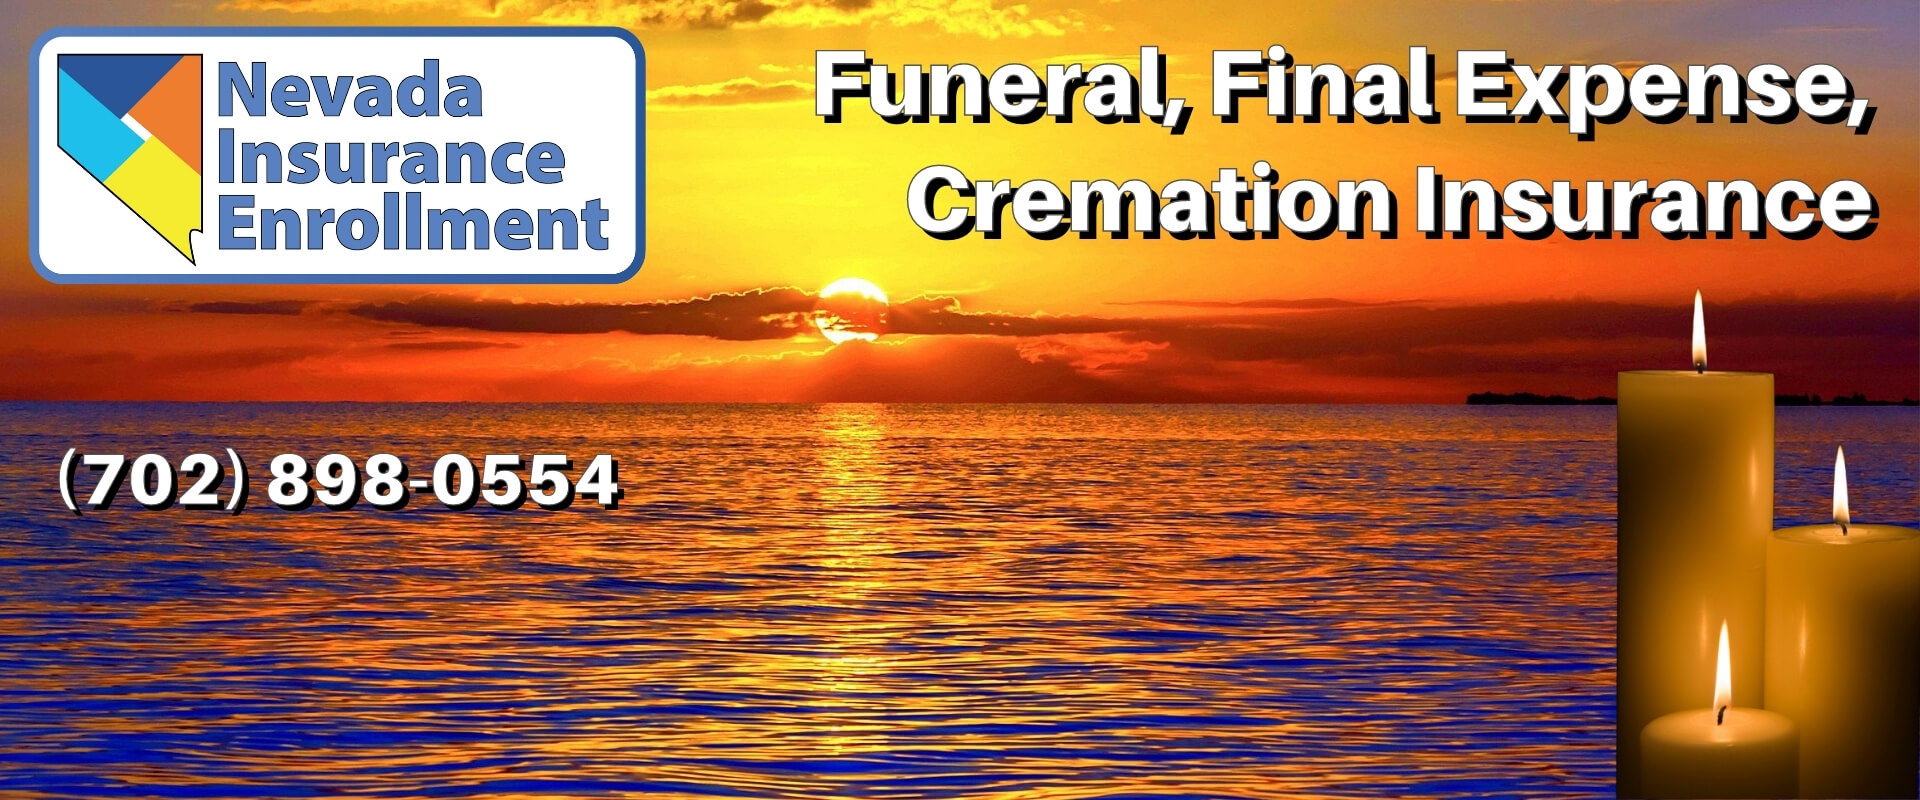 Funeral, Final Expense, Cremation MAIN page image